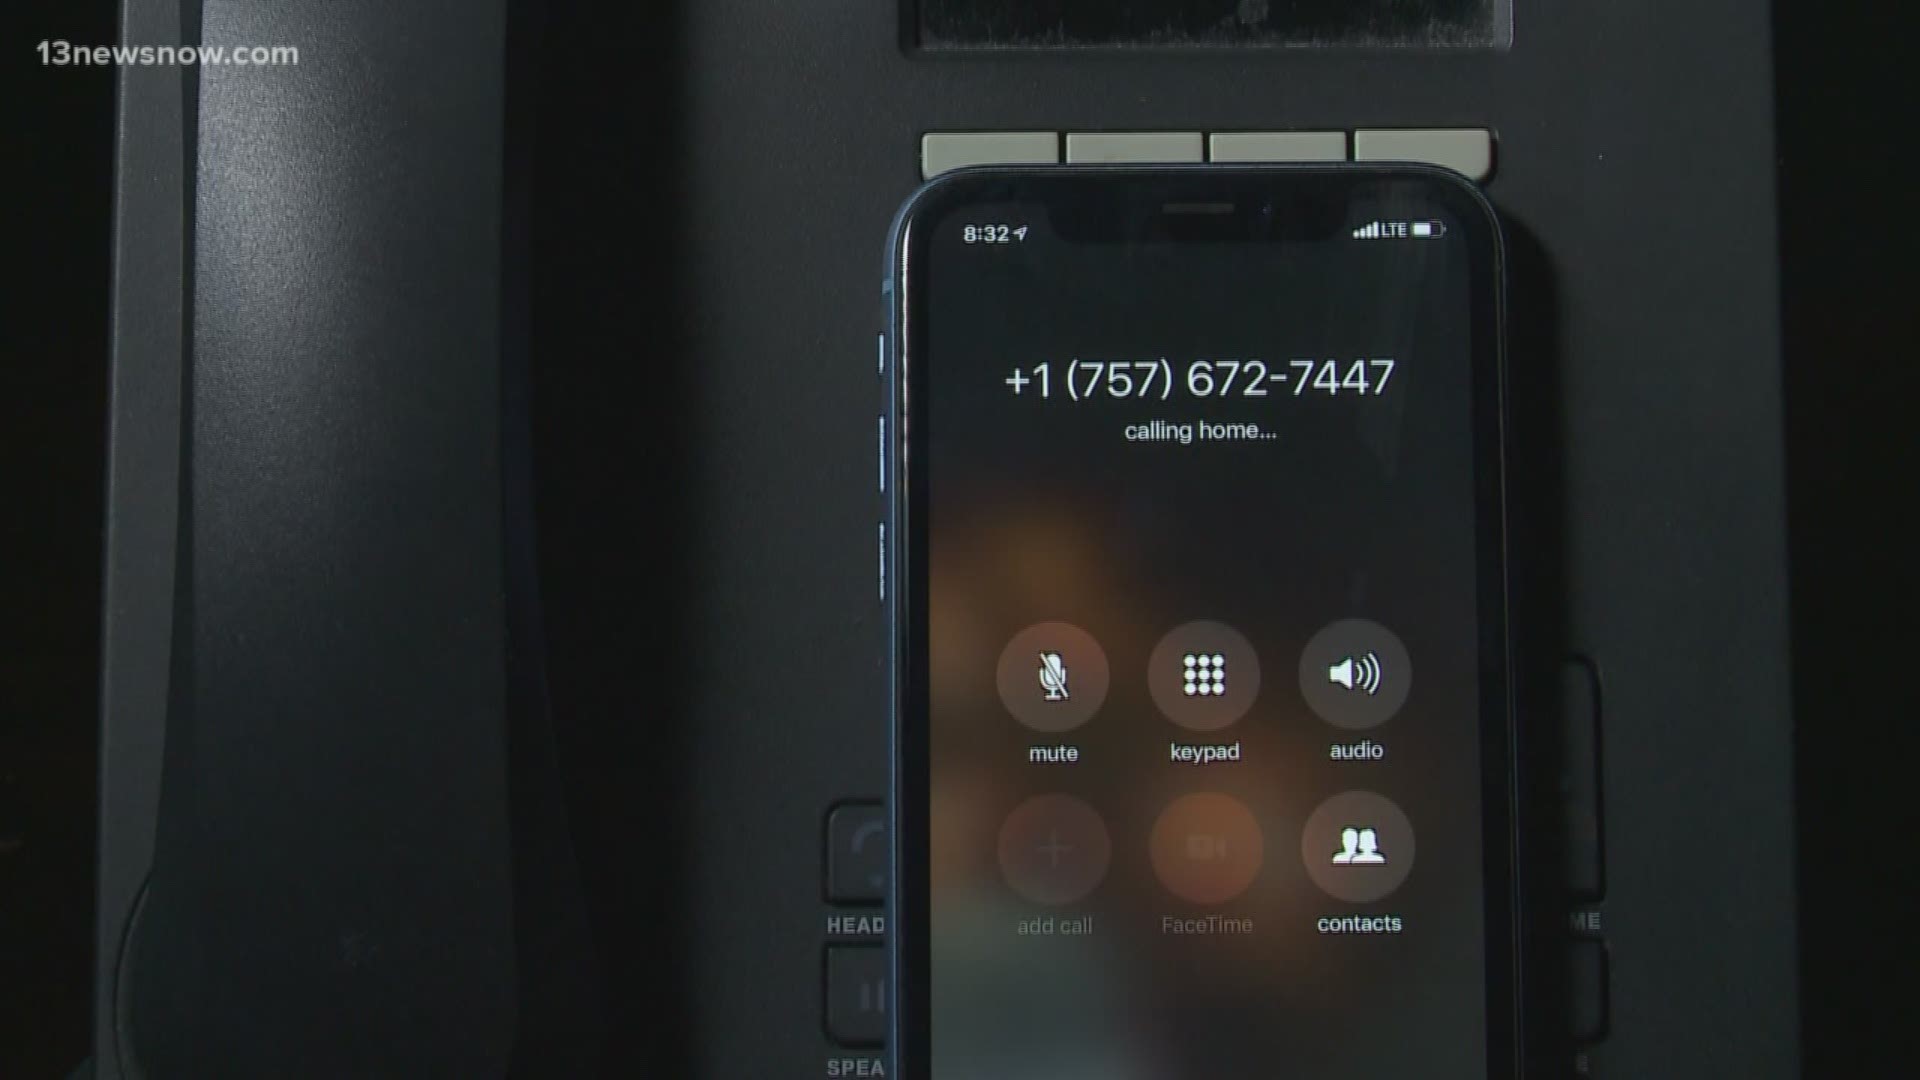 Due to the number of 757 phone numbers running out, there are plans to add a new area code to Hampton Roads. While the State Corporation Commission has been holding public meetings about the issue, many people weren't aware of them.